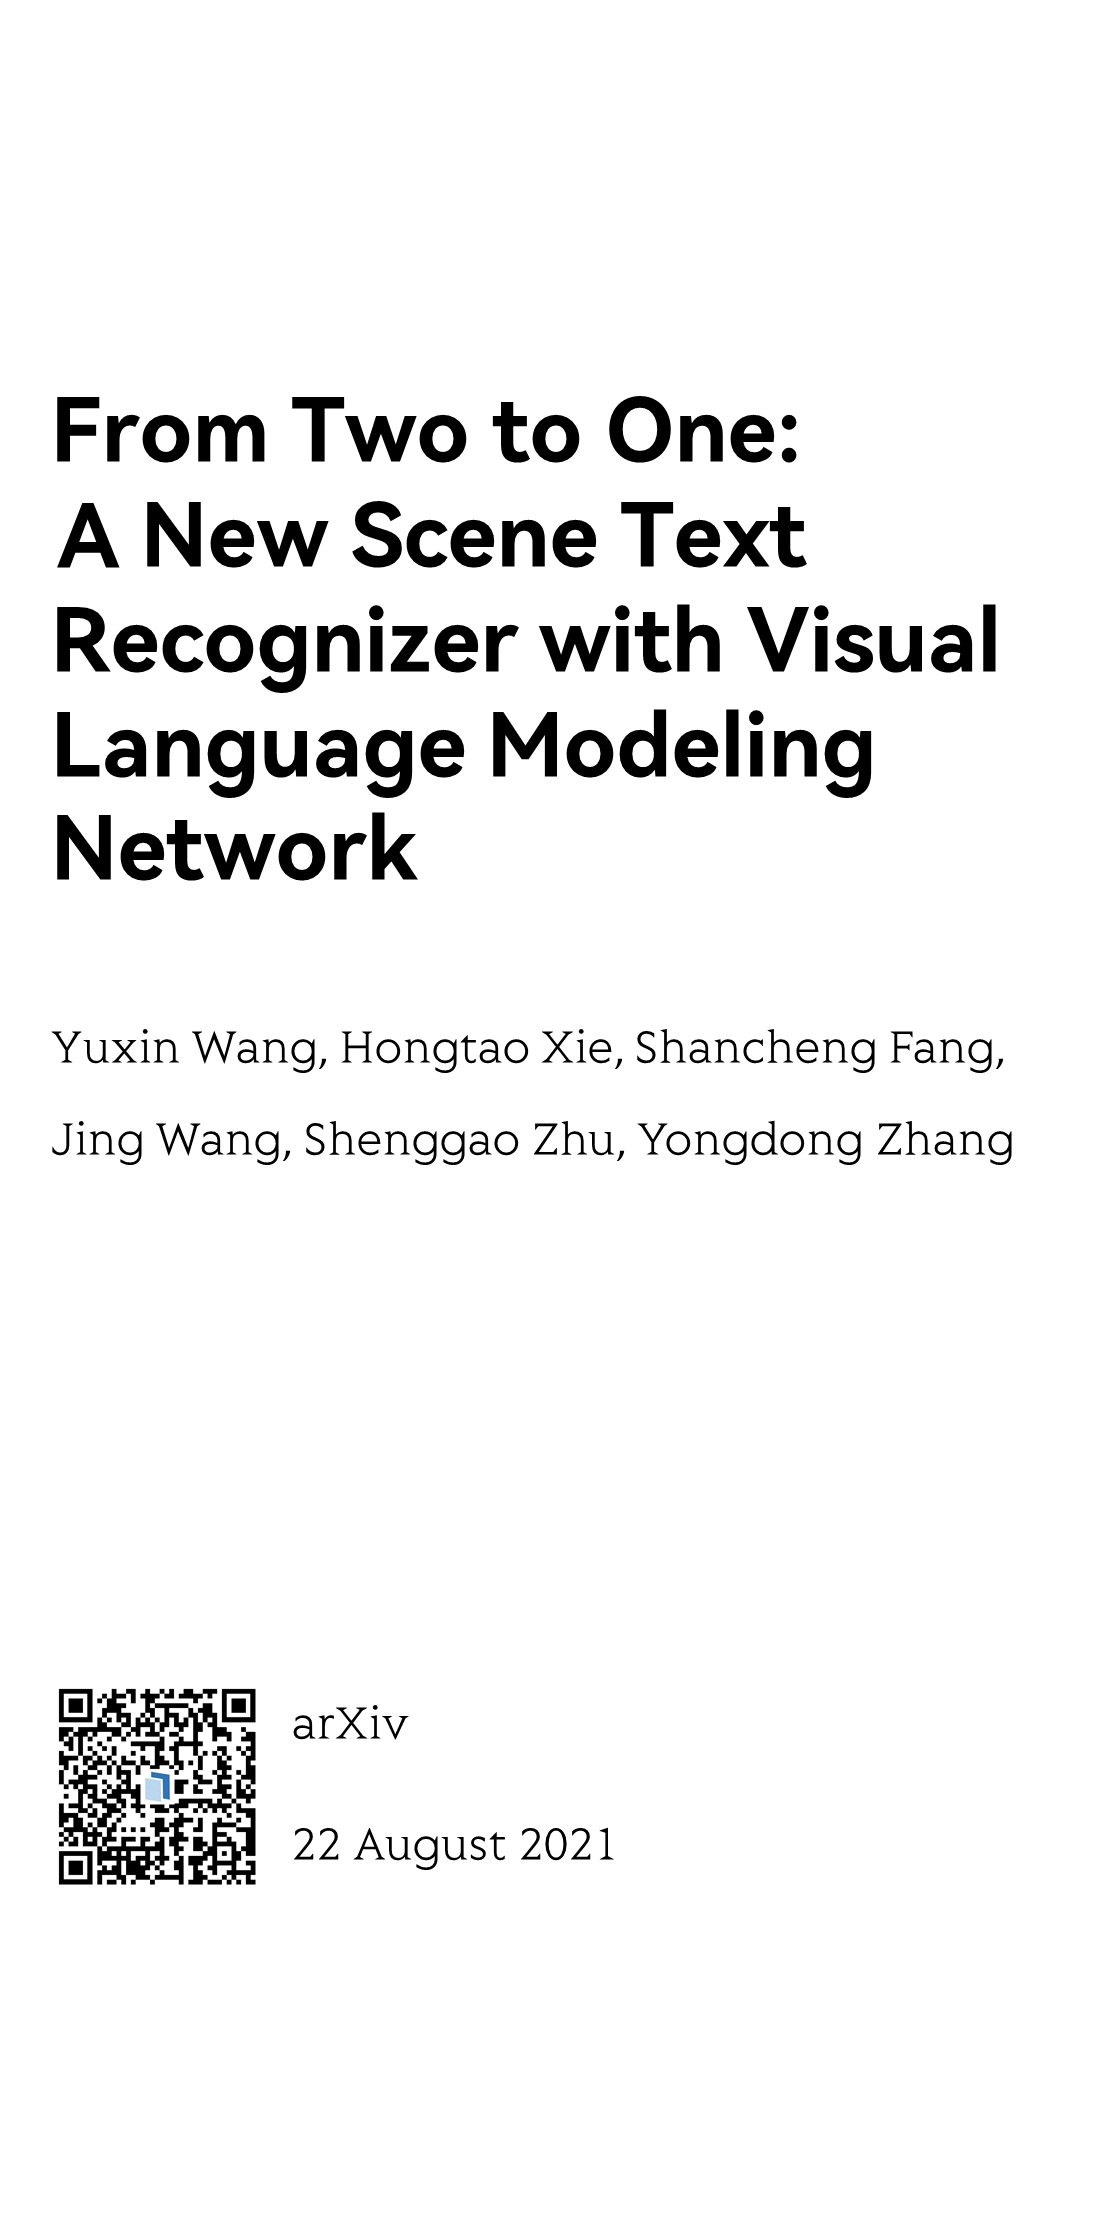 From Two to One: A New Scene Text Recognizer with Visual Language Modeling Network_1